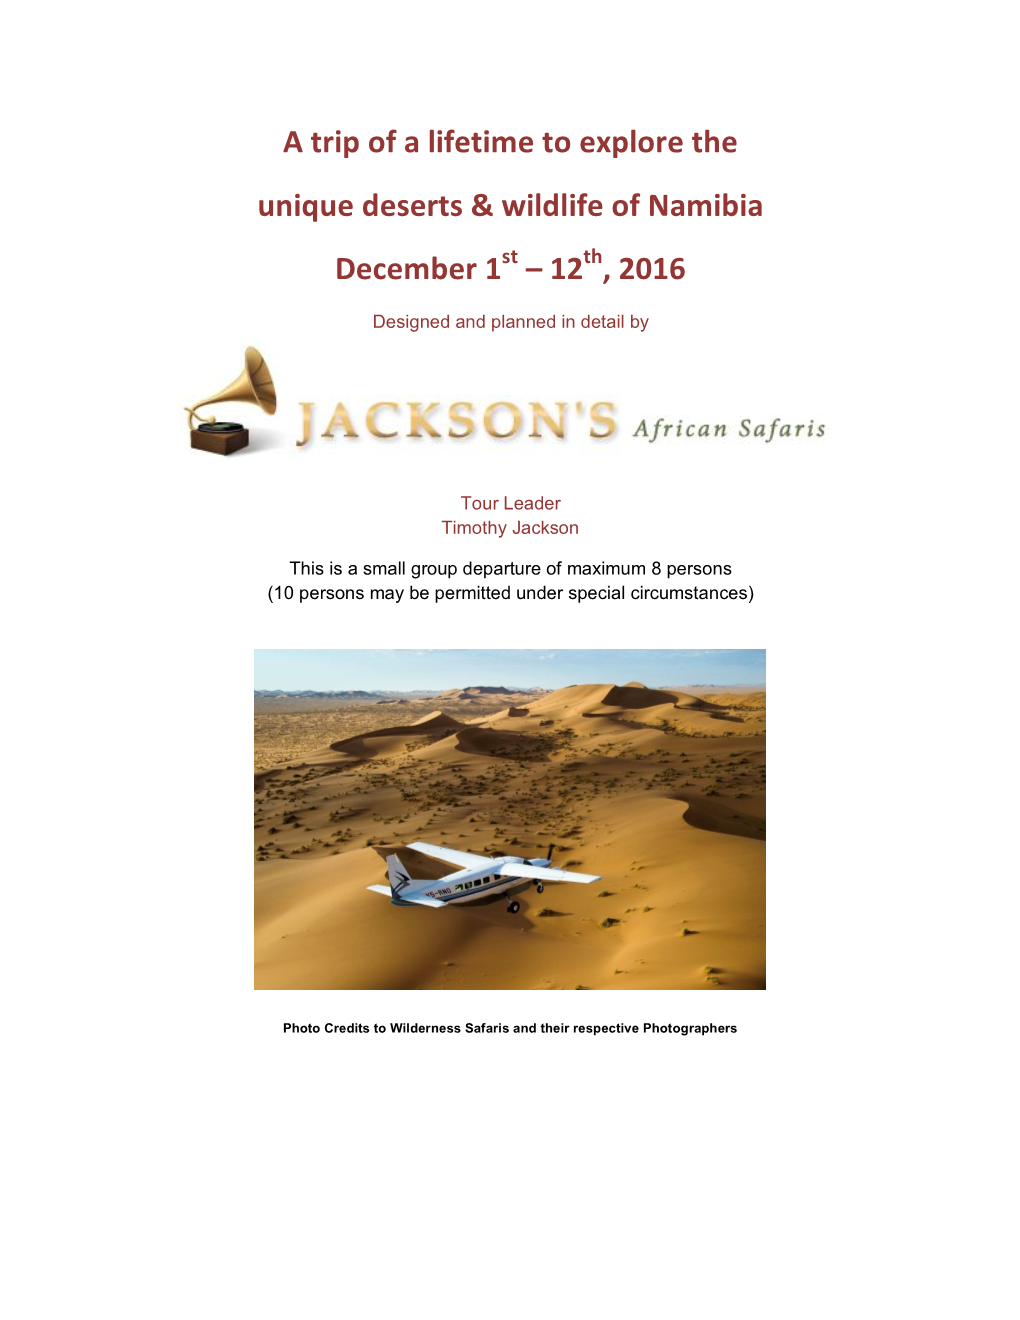 A Trip of a Lifetime to Explore the Unique Deserts & Wildlife of Namibia